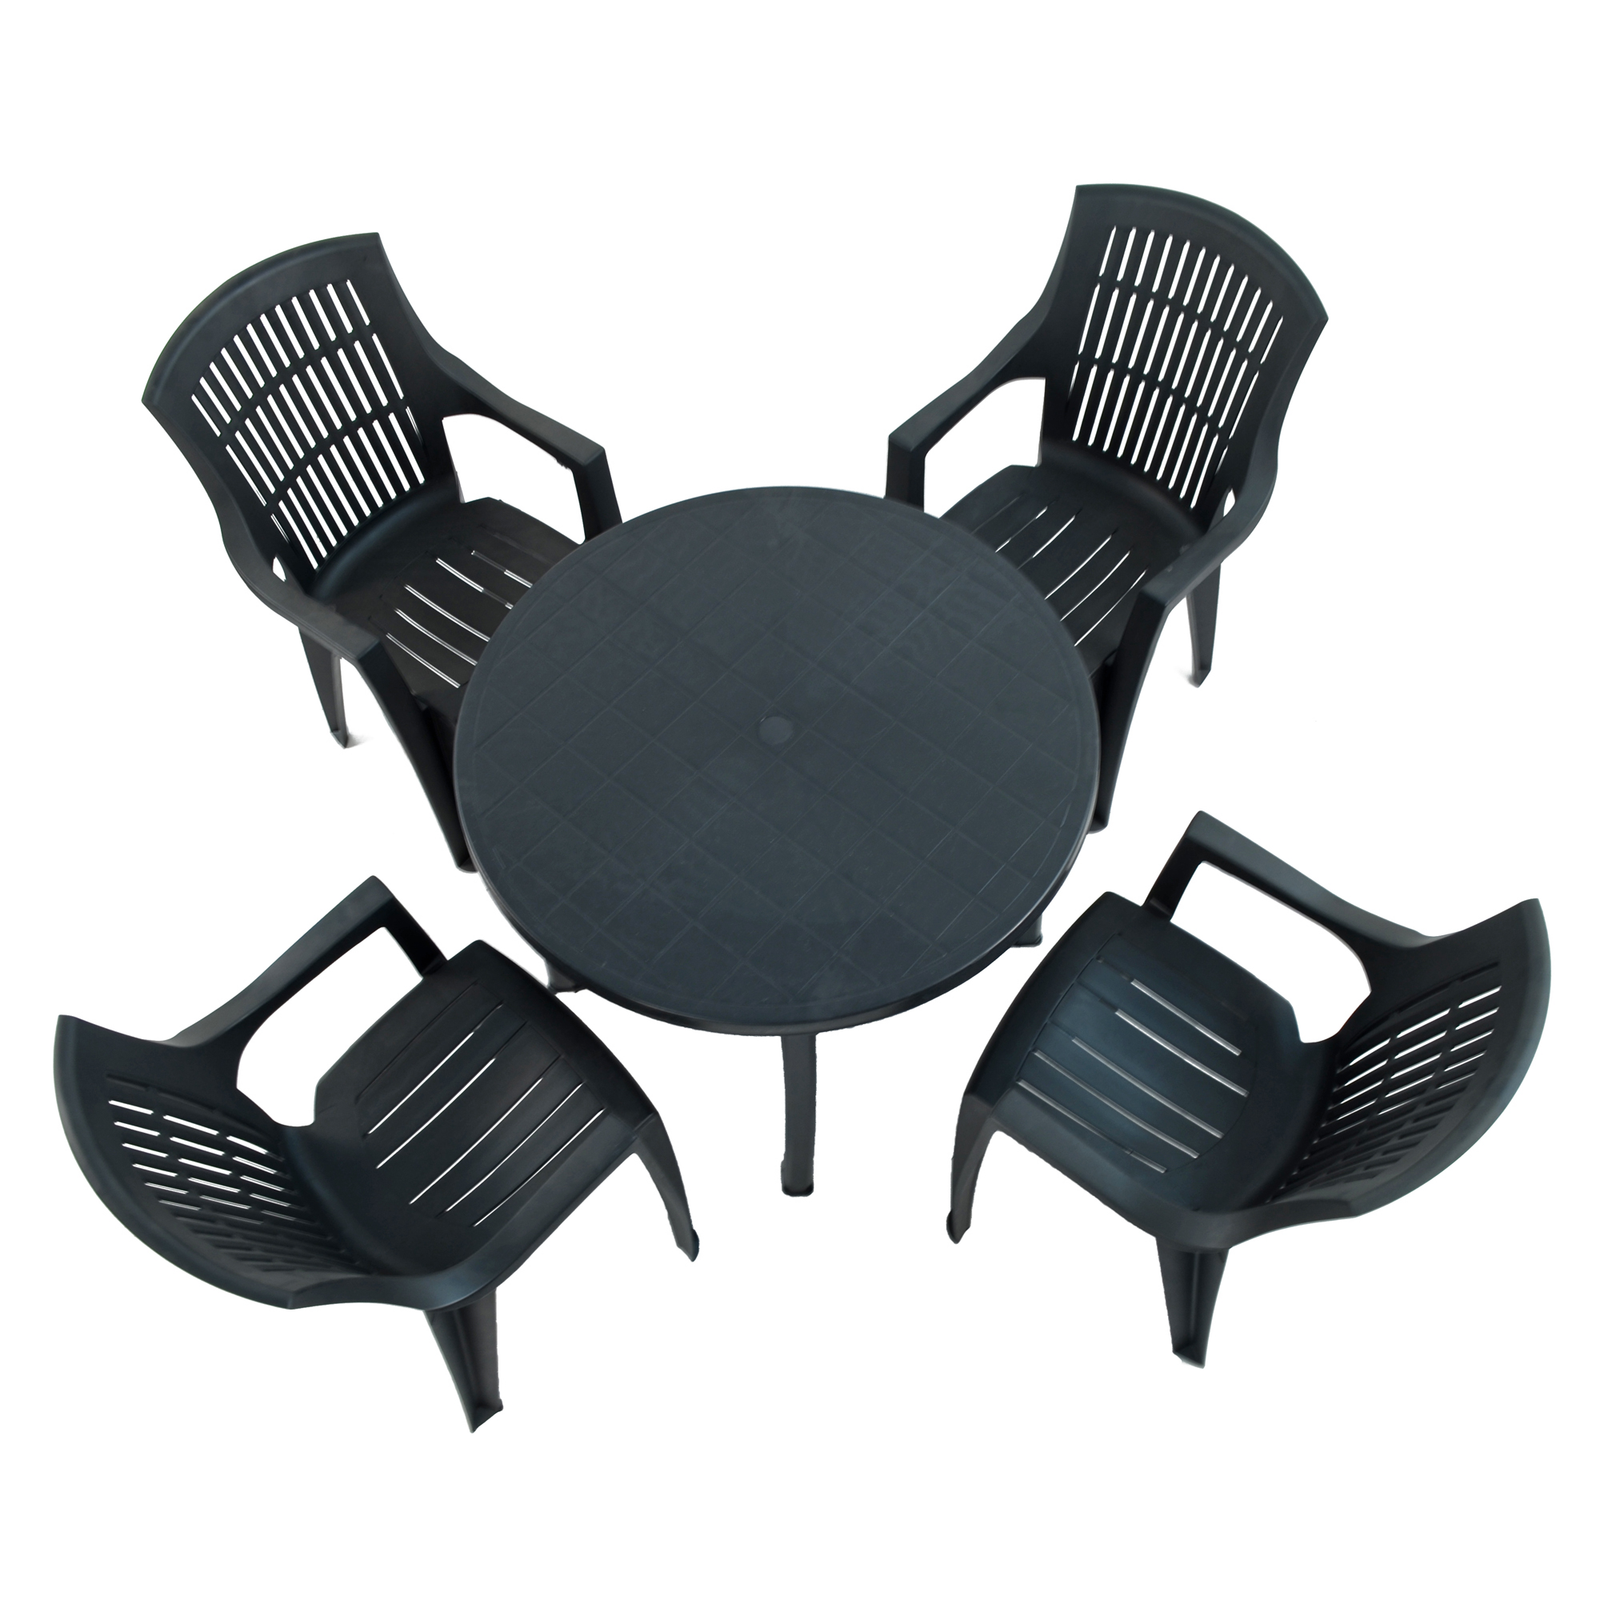 Trabella Revello Round Table With 4 Parma Chairs Set Anthracite Grey Dining Sets Trabella Default Title  